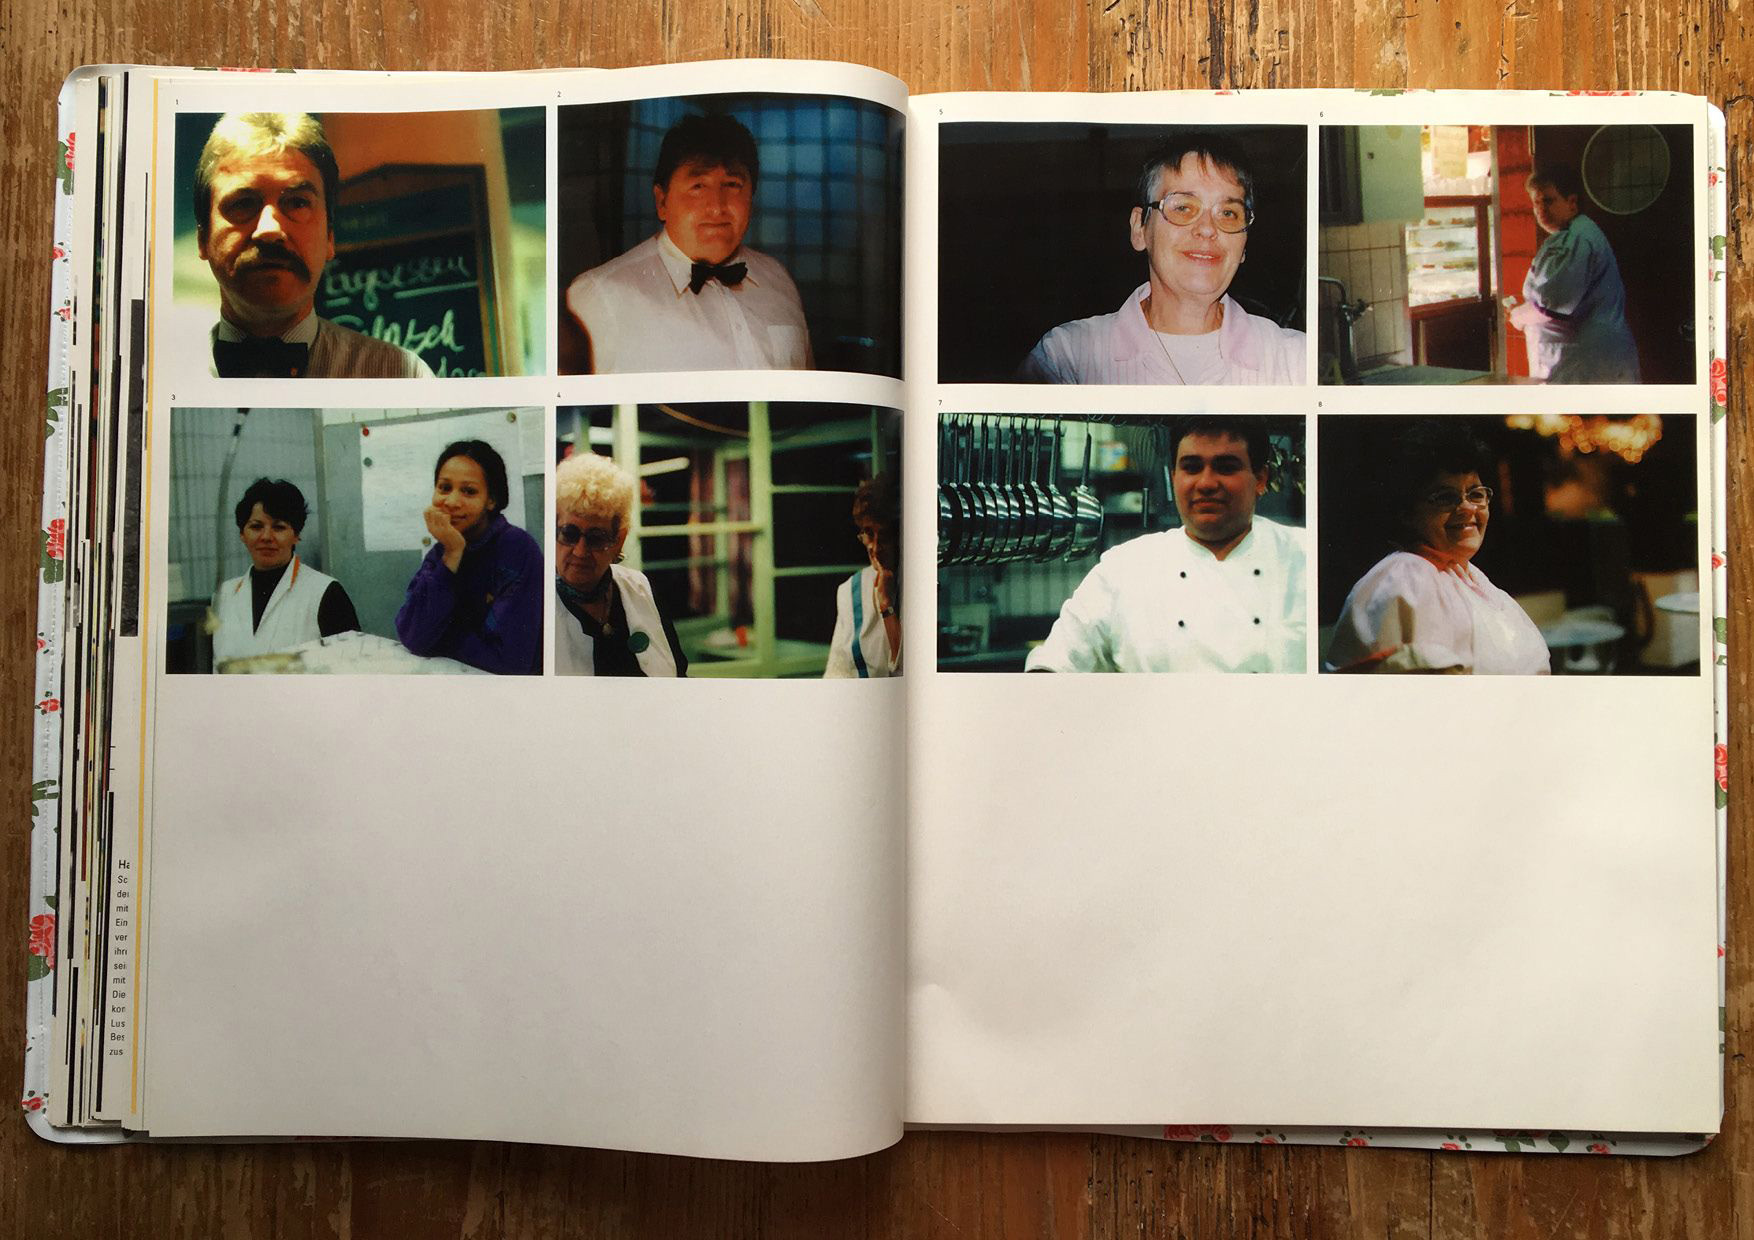 open raststatten book on wooden table with pictures of staff